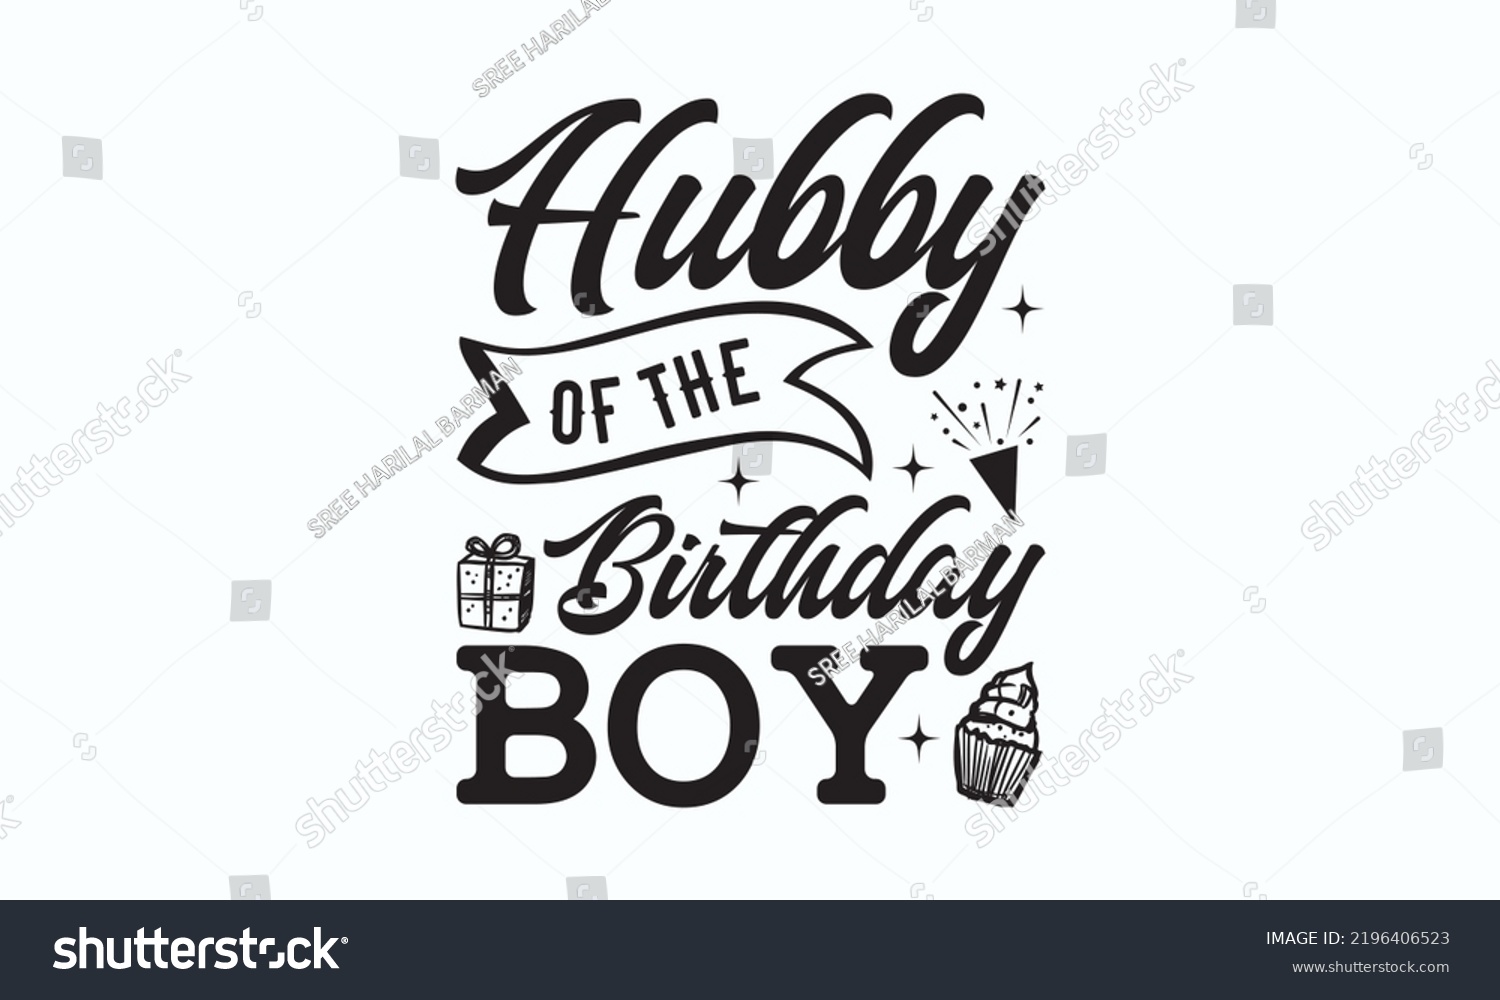 SVG of Hubby of the birthday boy - Birthday t-shirt design, Hand drew lettering phrase, templet, Calligraphy graphic design, SVG Files for Cutting Cricut and Silhouette. Eps 10 svg